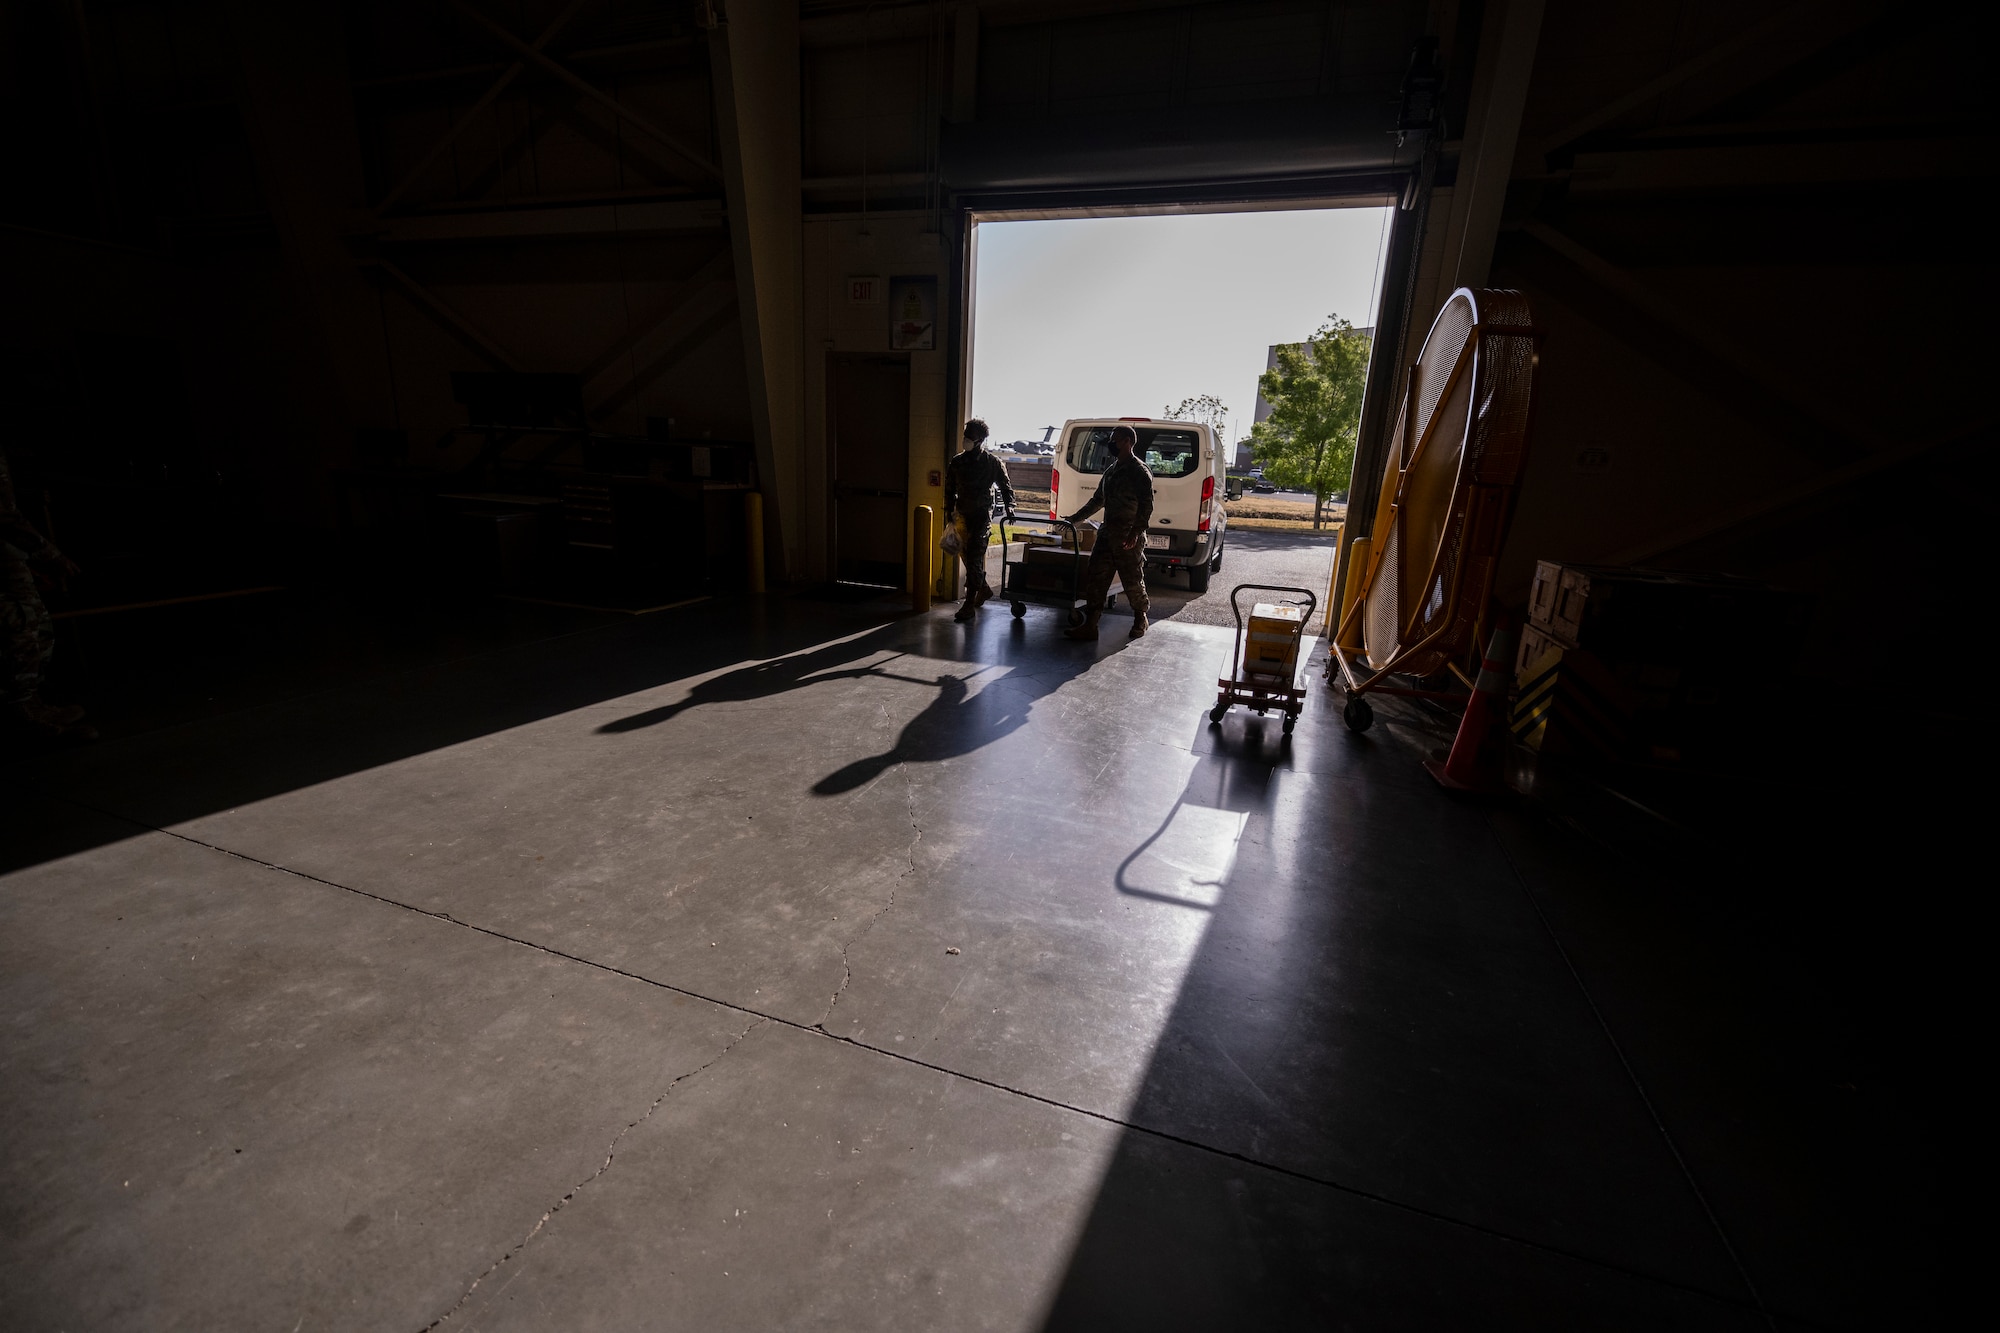 Two silhouettes of Airmen are seen walking in to a room from outside. Their shadows are seen on the floor. They are pushing a large cart covered with aircraft parts that are in need of repair.